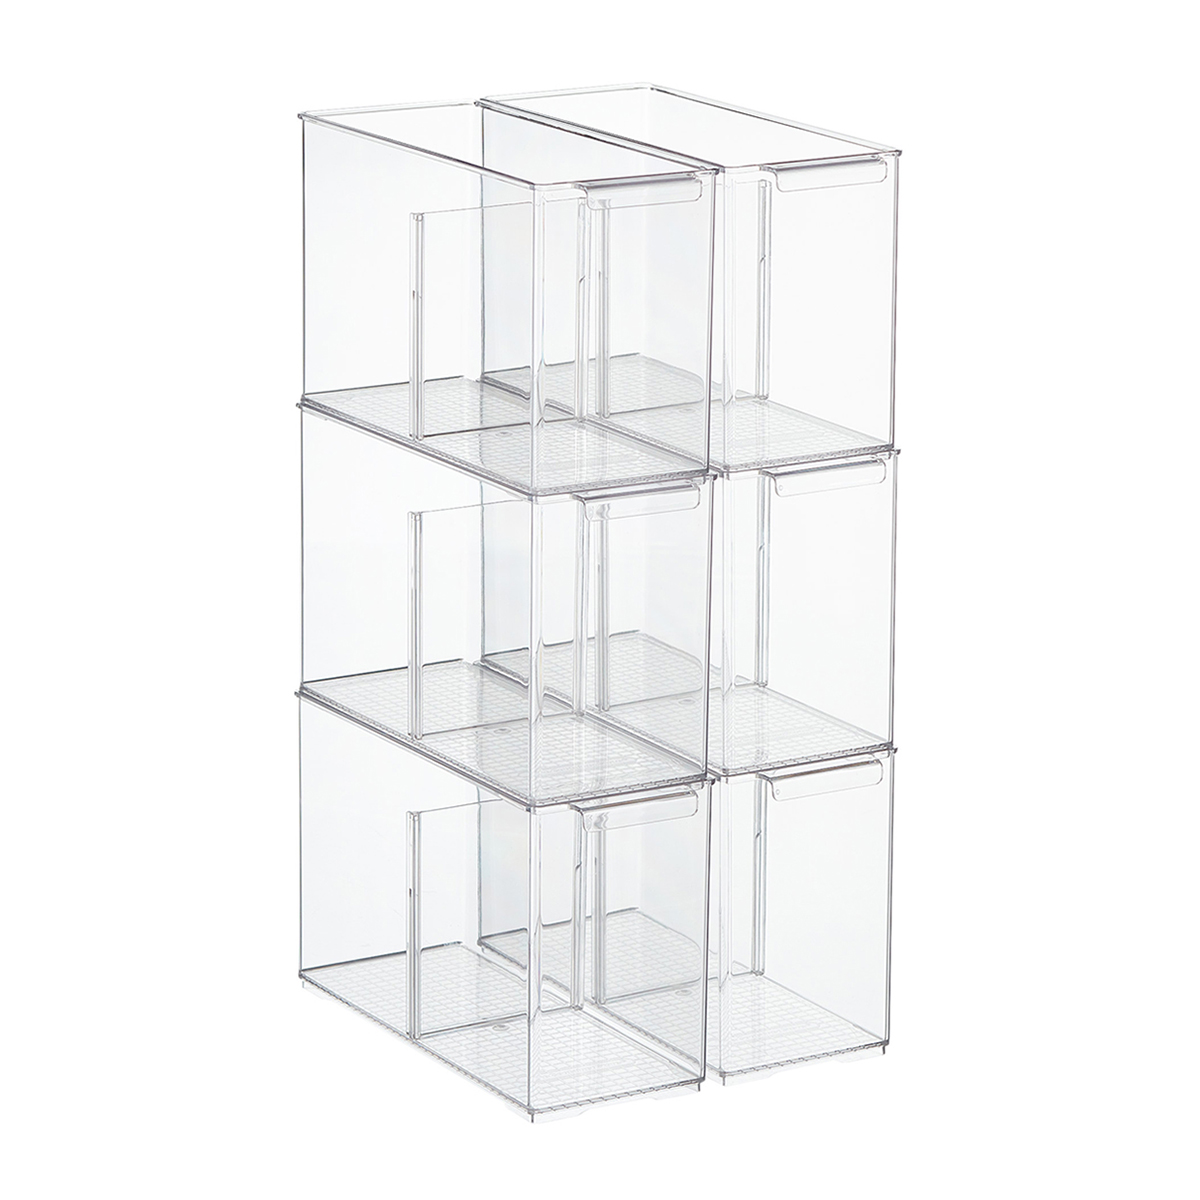 https://www.containerstore.com/catalogimages/448064/10089874_The_Container_Store_Cabinet.jpg